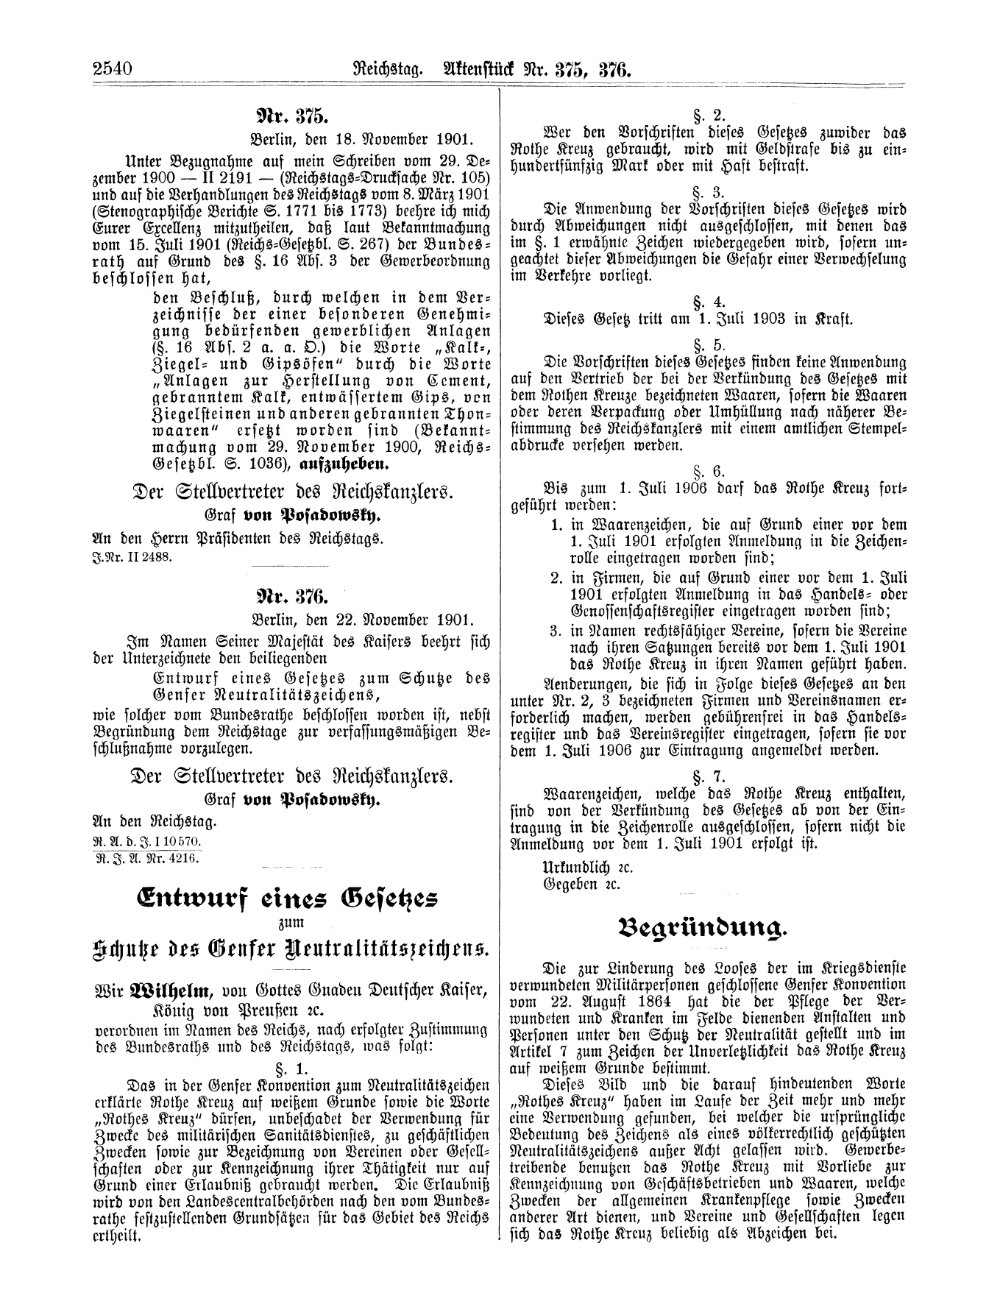 Scan of page 2540